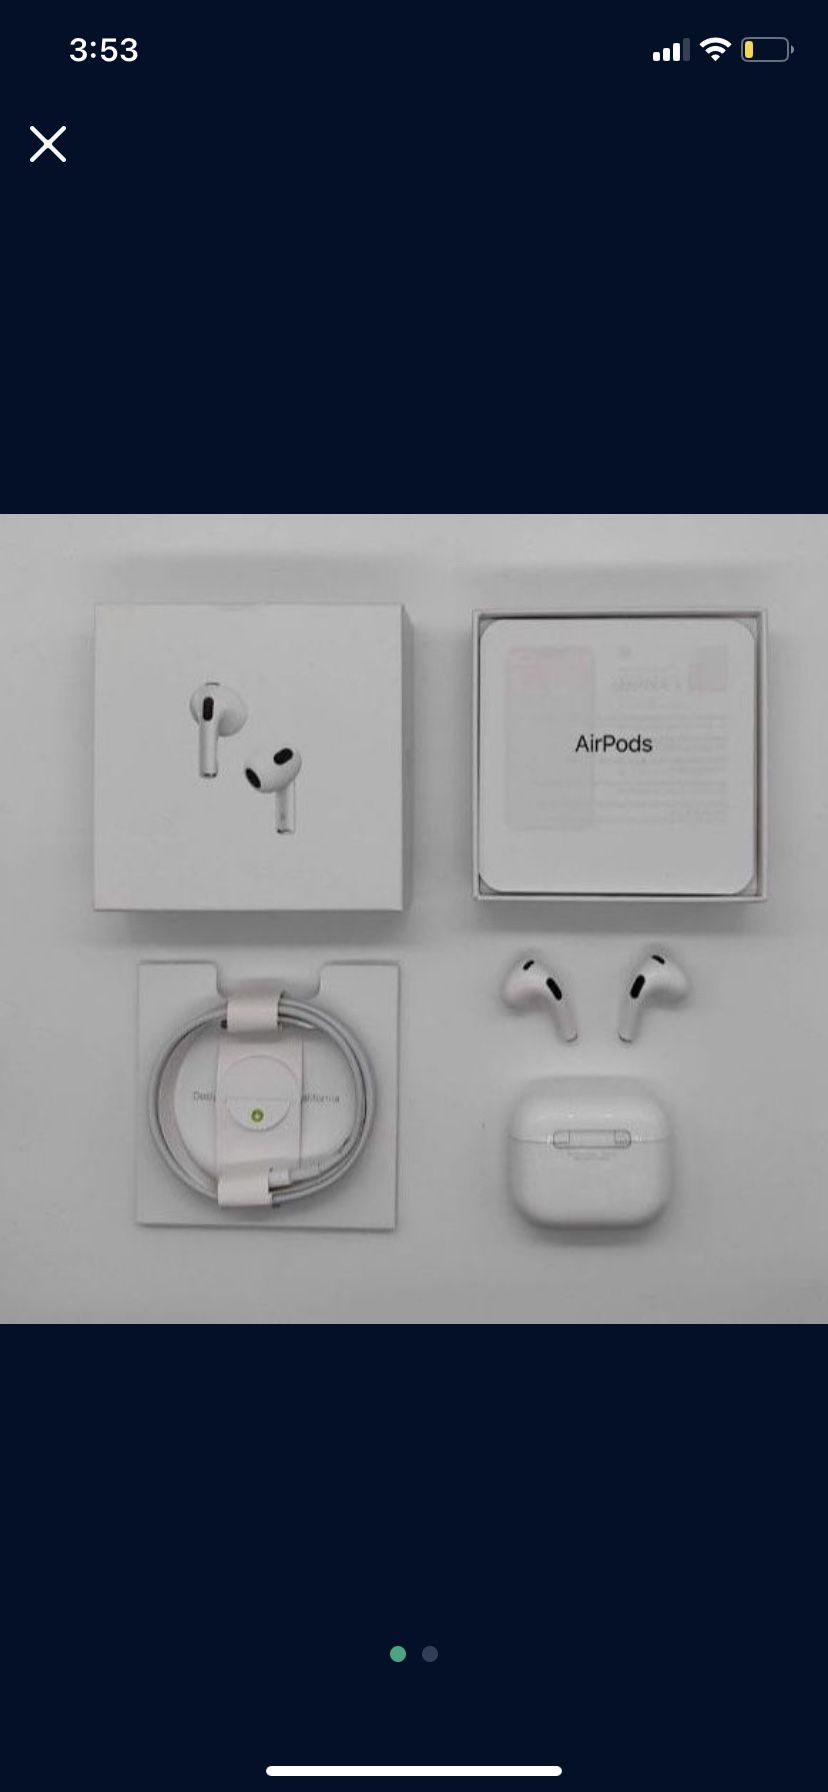 $65 BEST OFFER 3rd Generation AirPods Pros (Brand new)  STOCKTON CA‼️